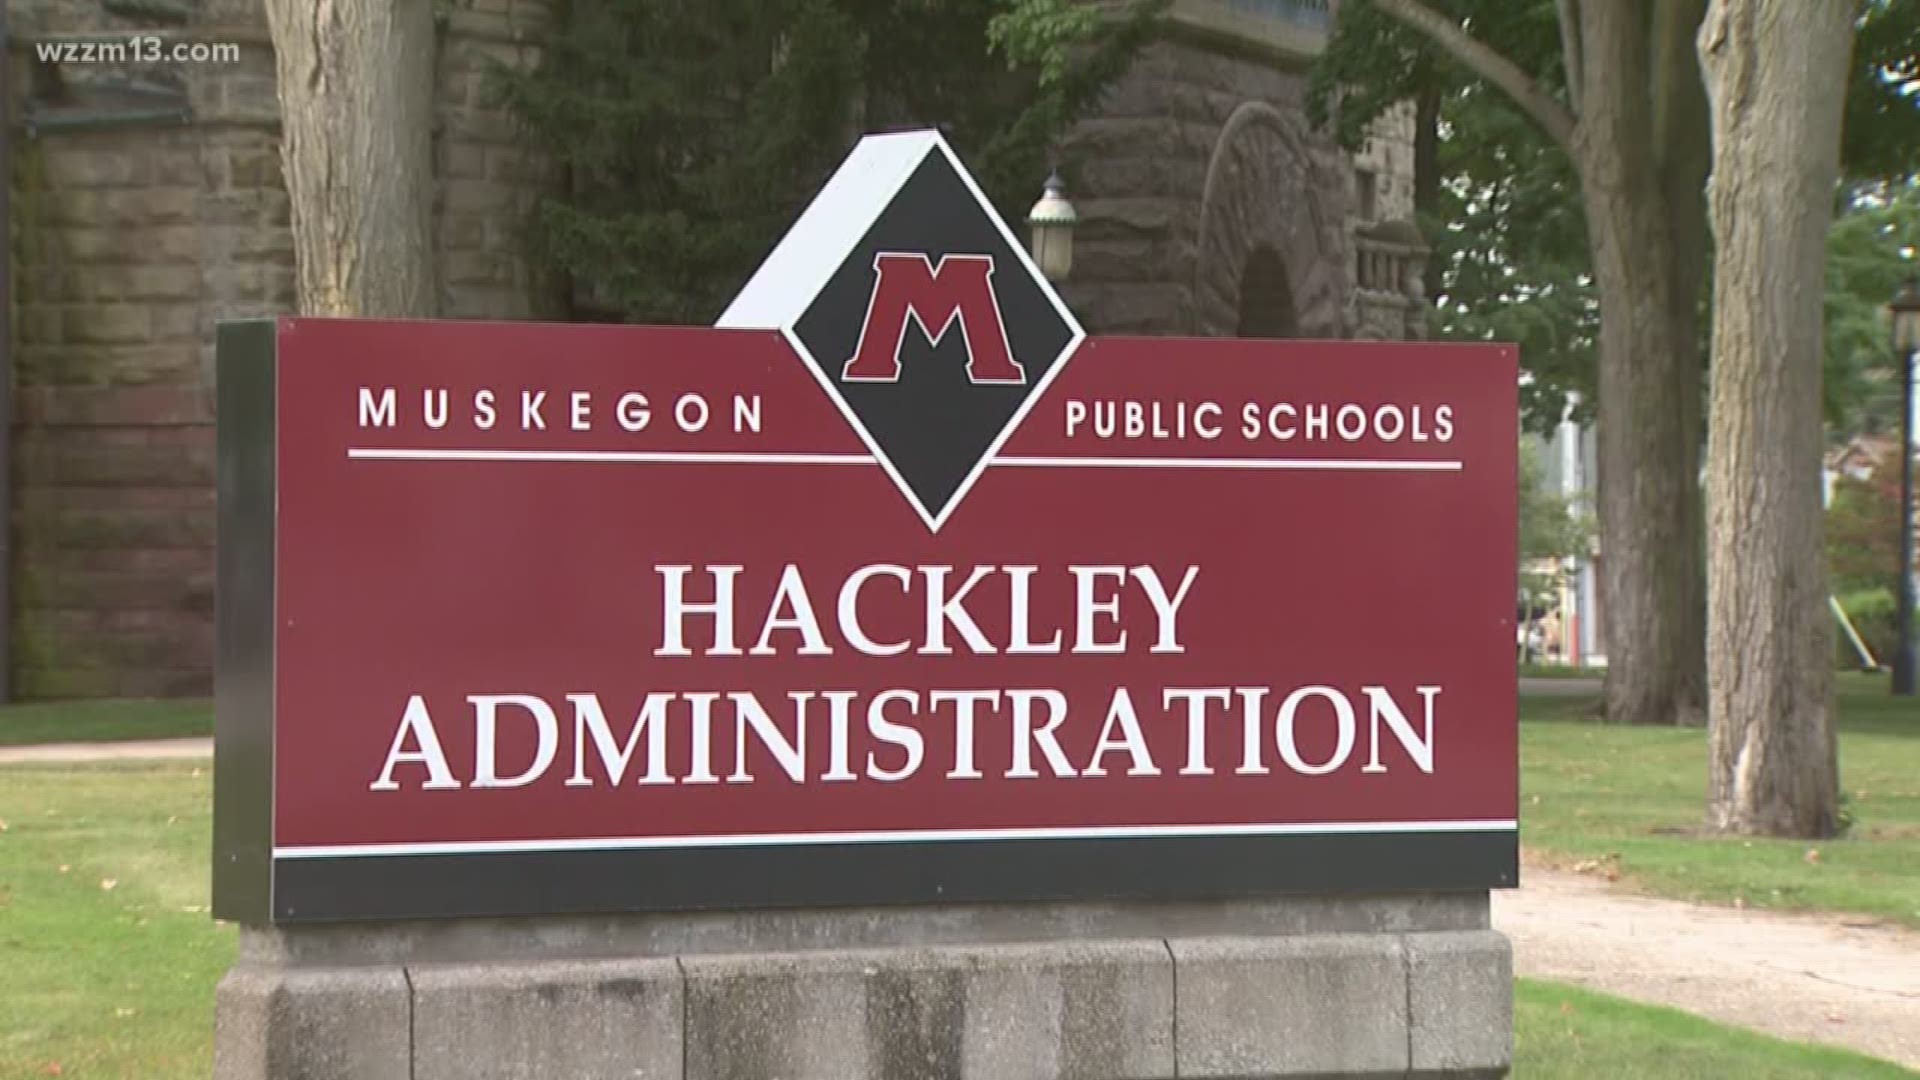 Muskegon Hackley Administration building may be sold